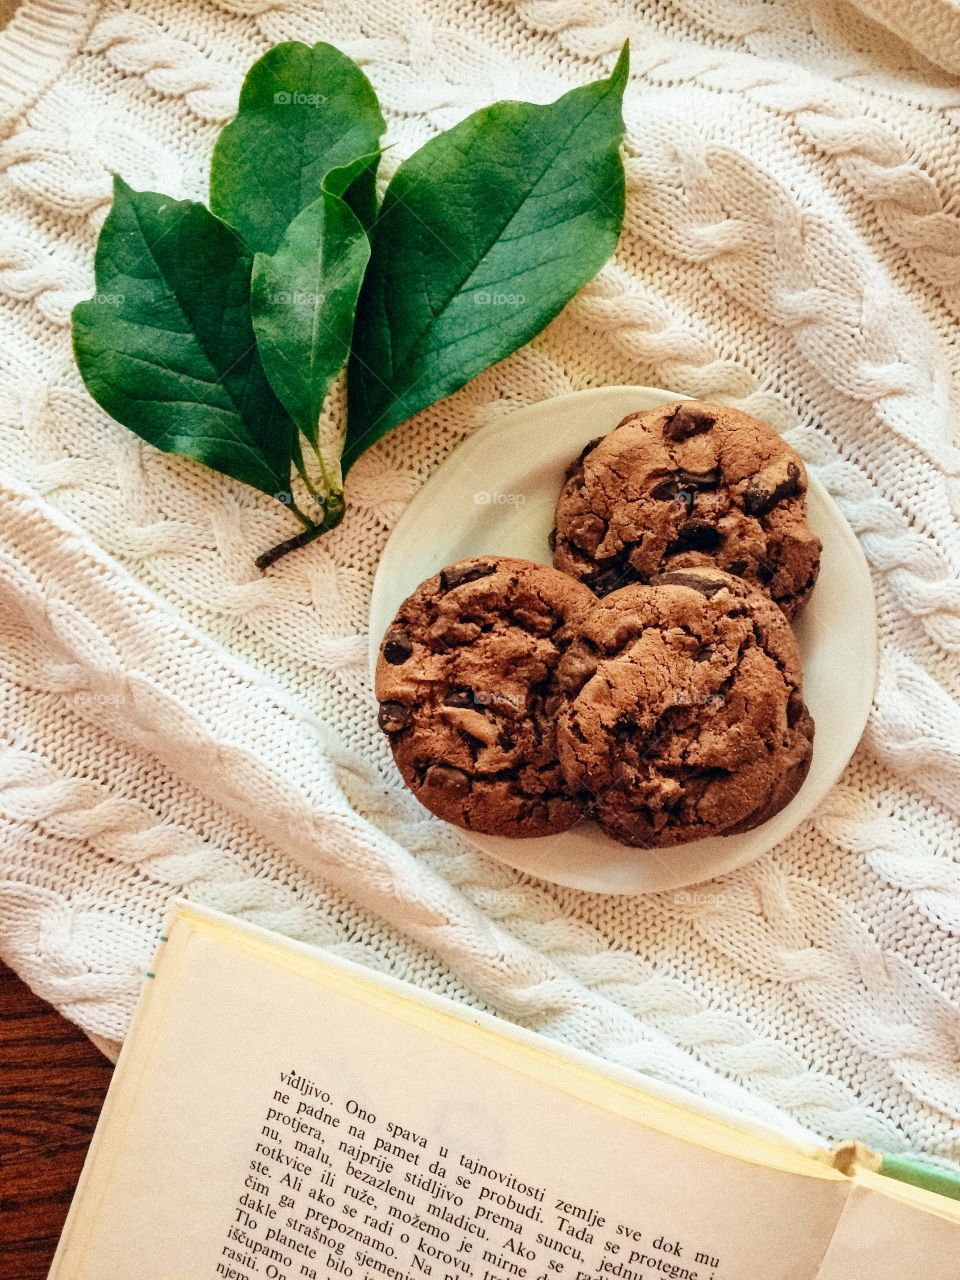 Cookies and books